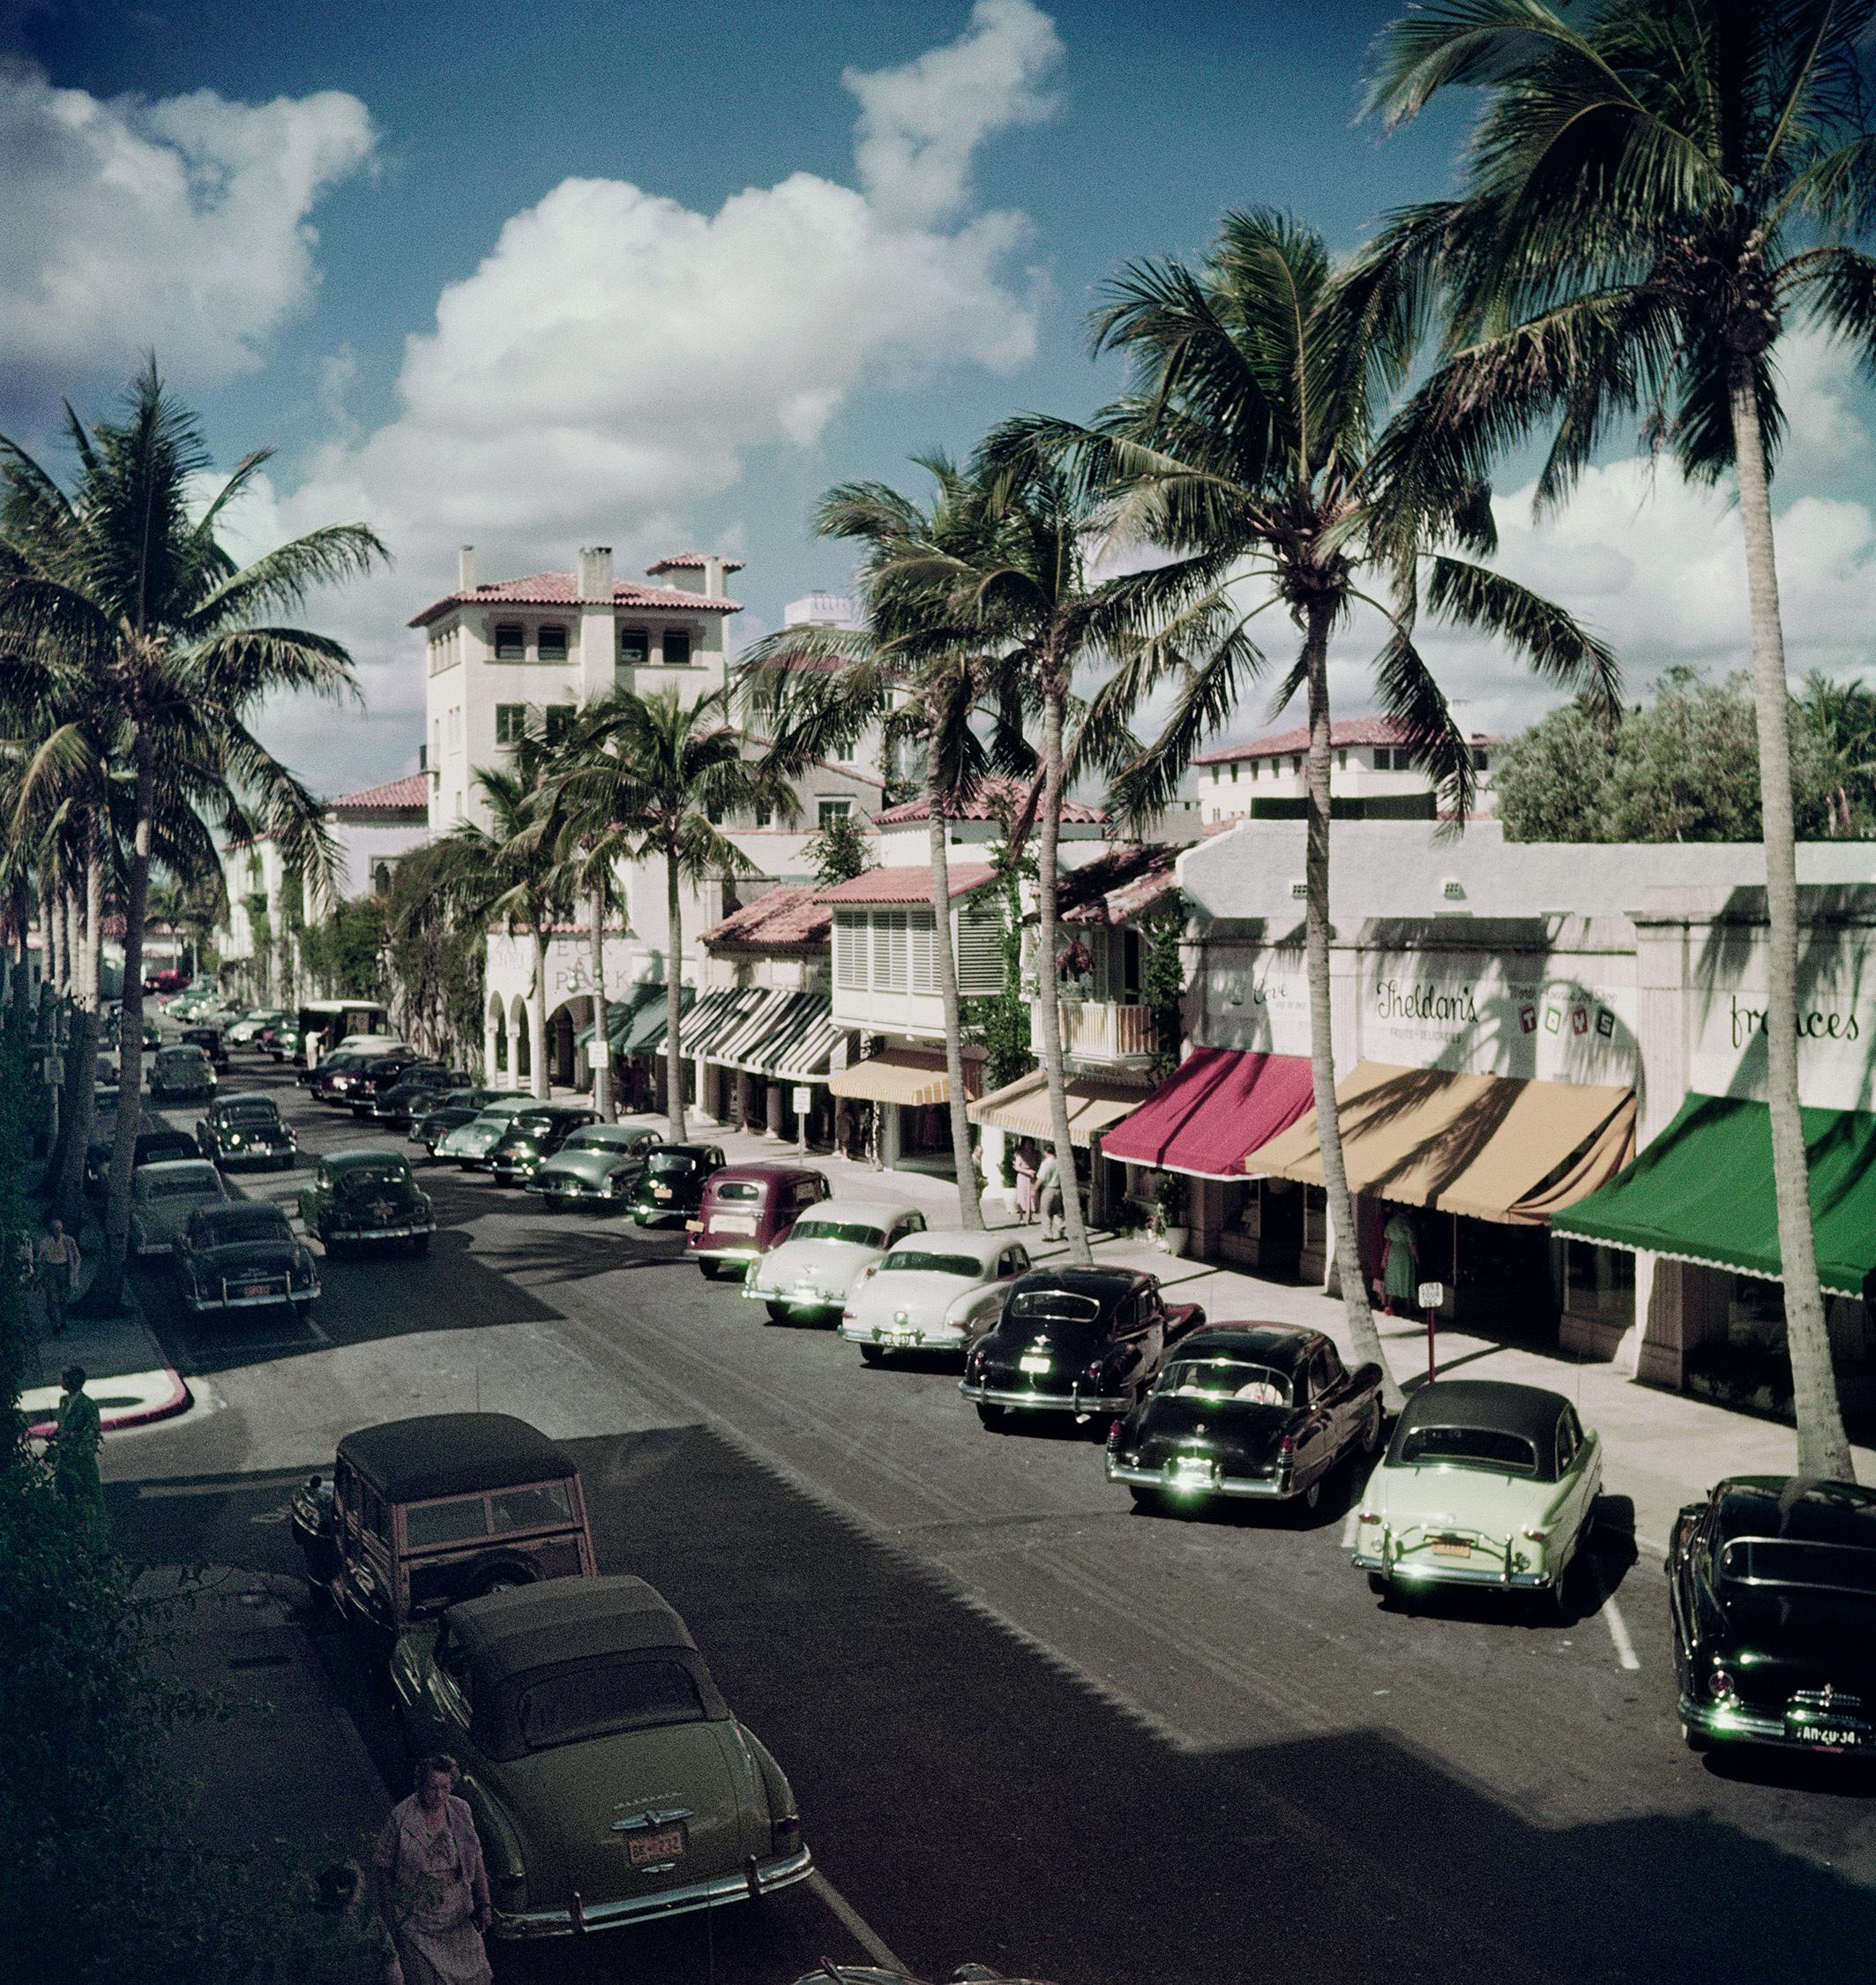 Palm Beach Street 

1953

Cars parked on a tree-lined street in Palm Beach, Florida, circa 1953. 

(Photo by Slim Aarons)

60x60” / 152 x 152 cm - paper size 
Archival pigment print
unframed 
(framing available see examples - please enquire)